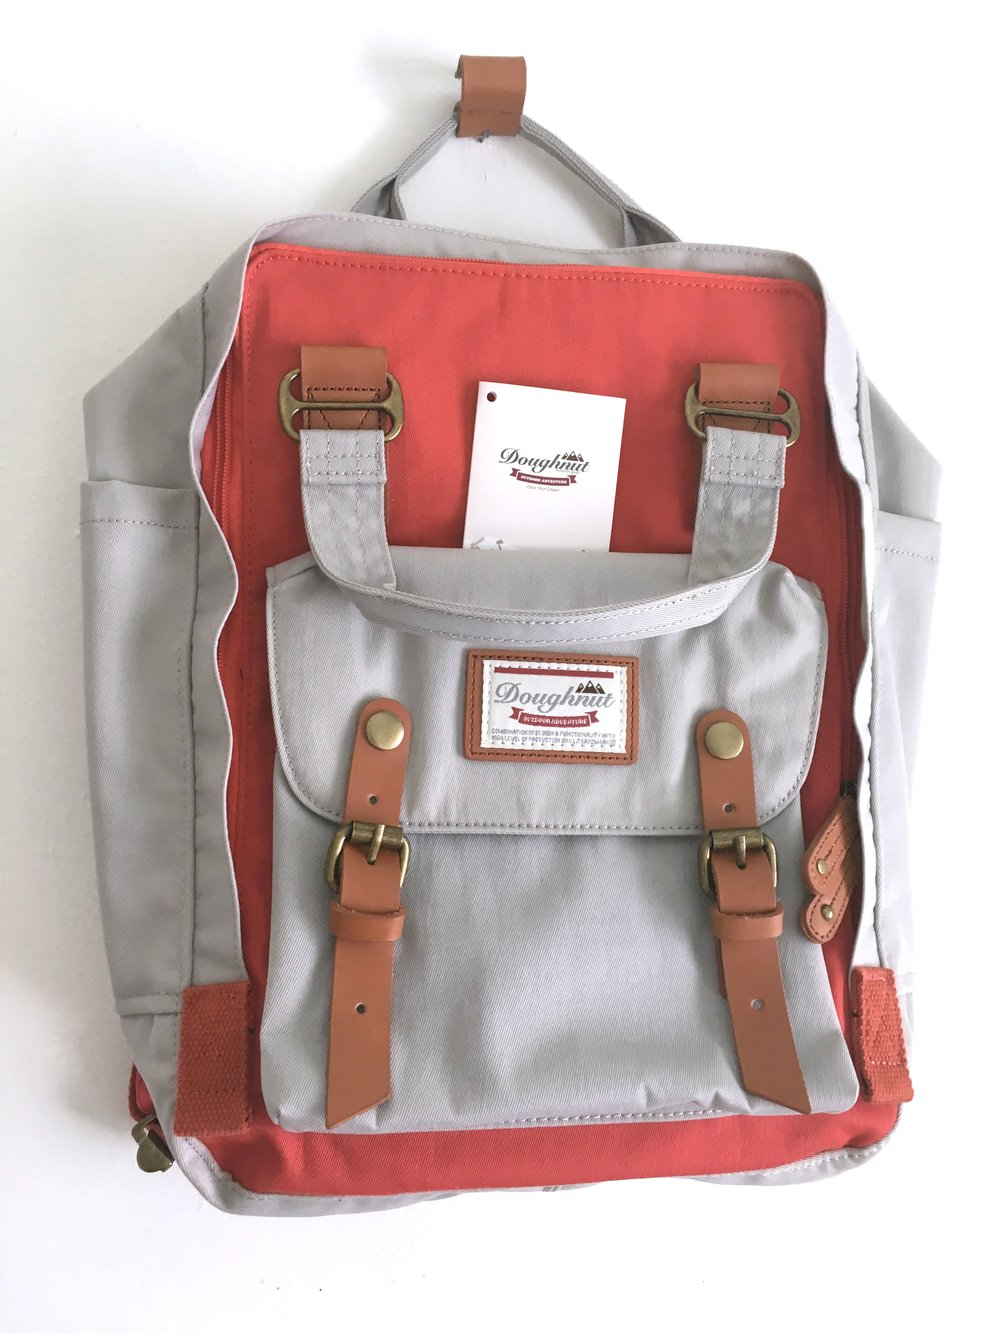 Doughnut Macaroon Backpack Review — The Pen Addict